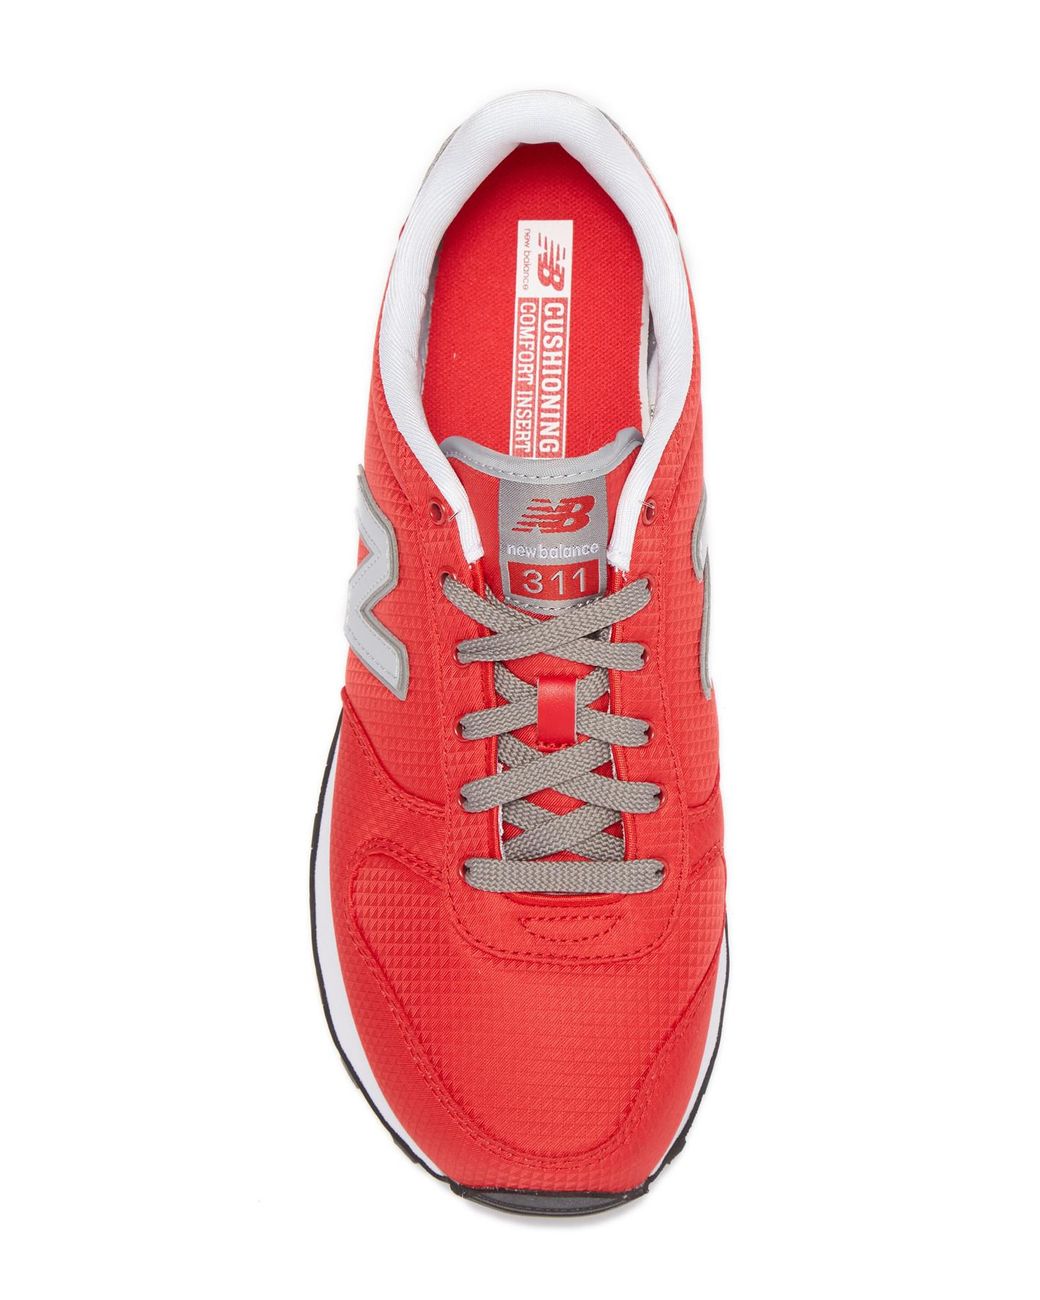 New Balance 311 Sneaker in Red for Men | Lyst